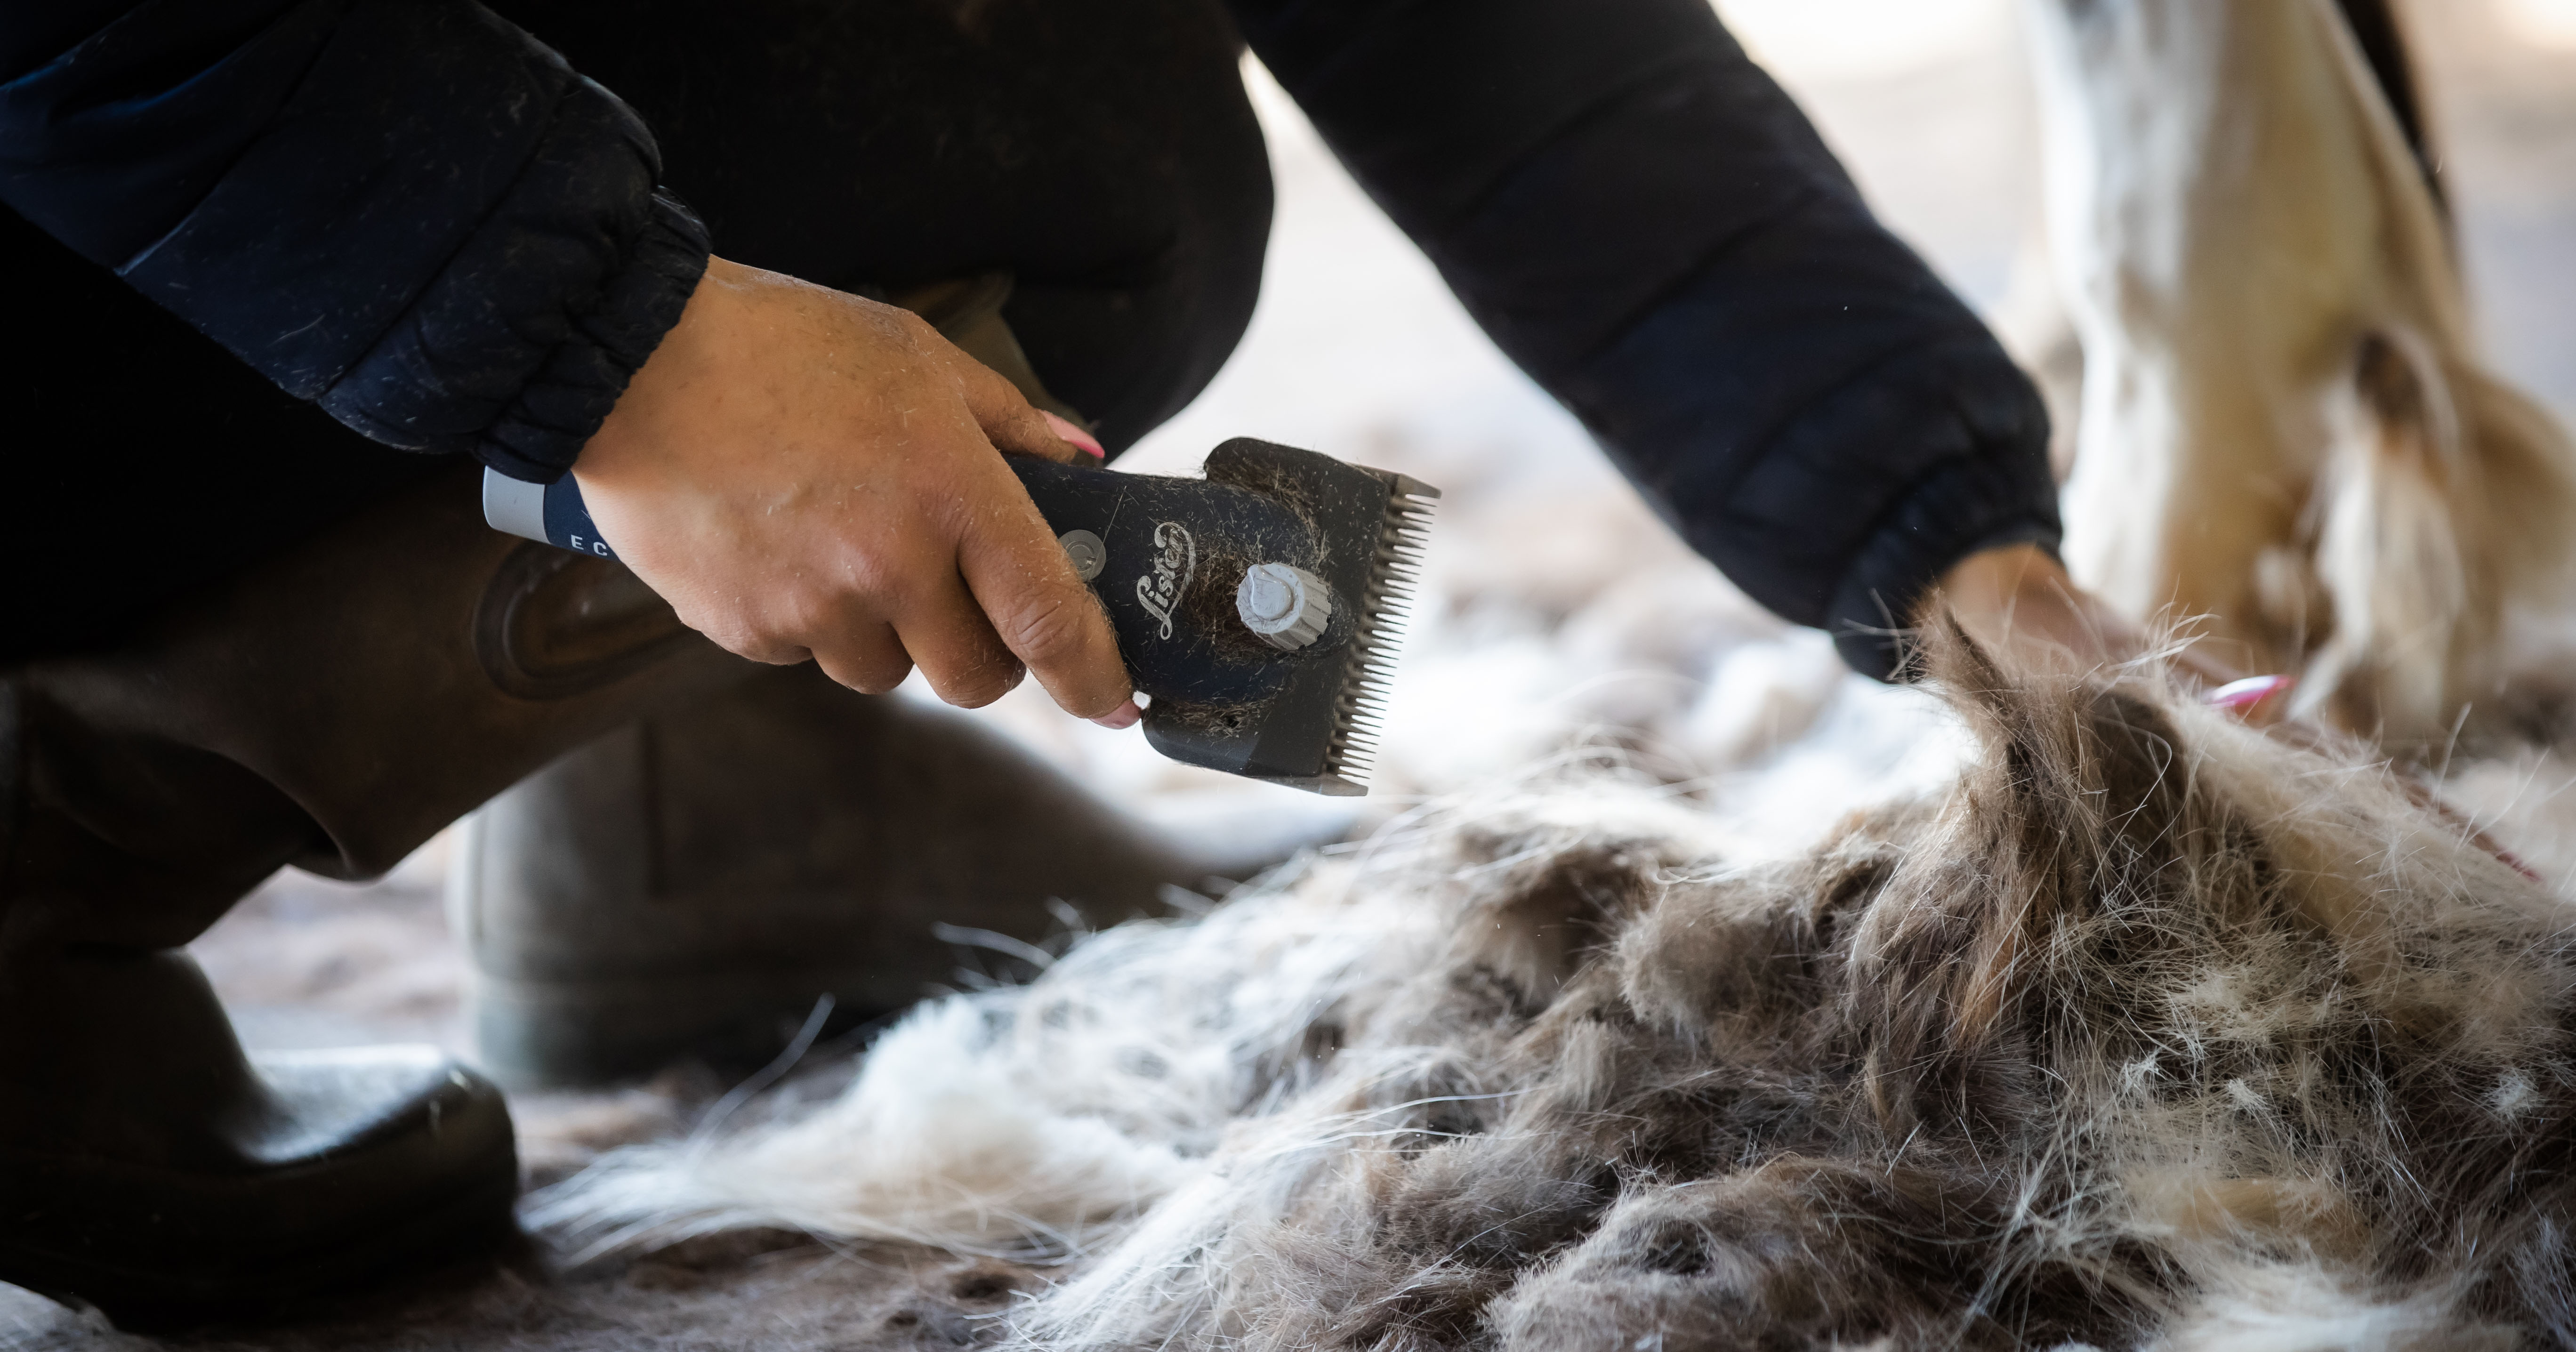 Lister launches new product that is set to revolutionise clipping.